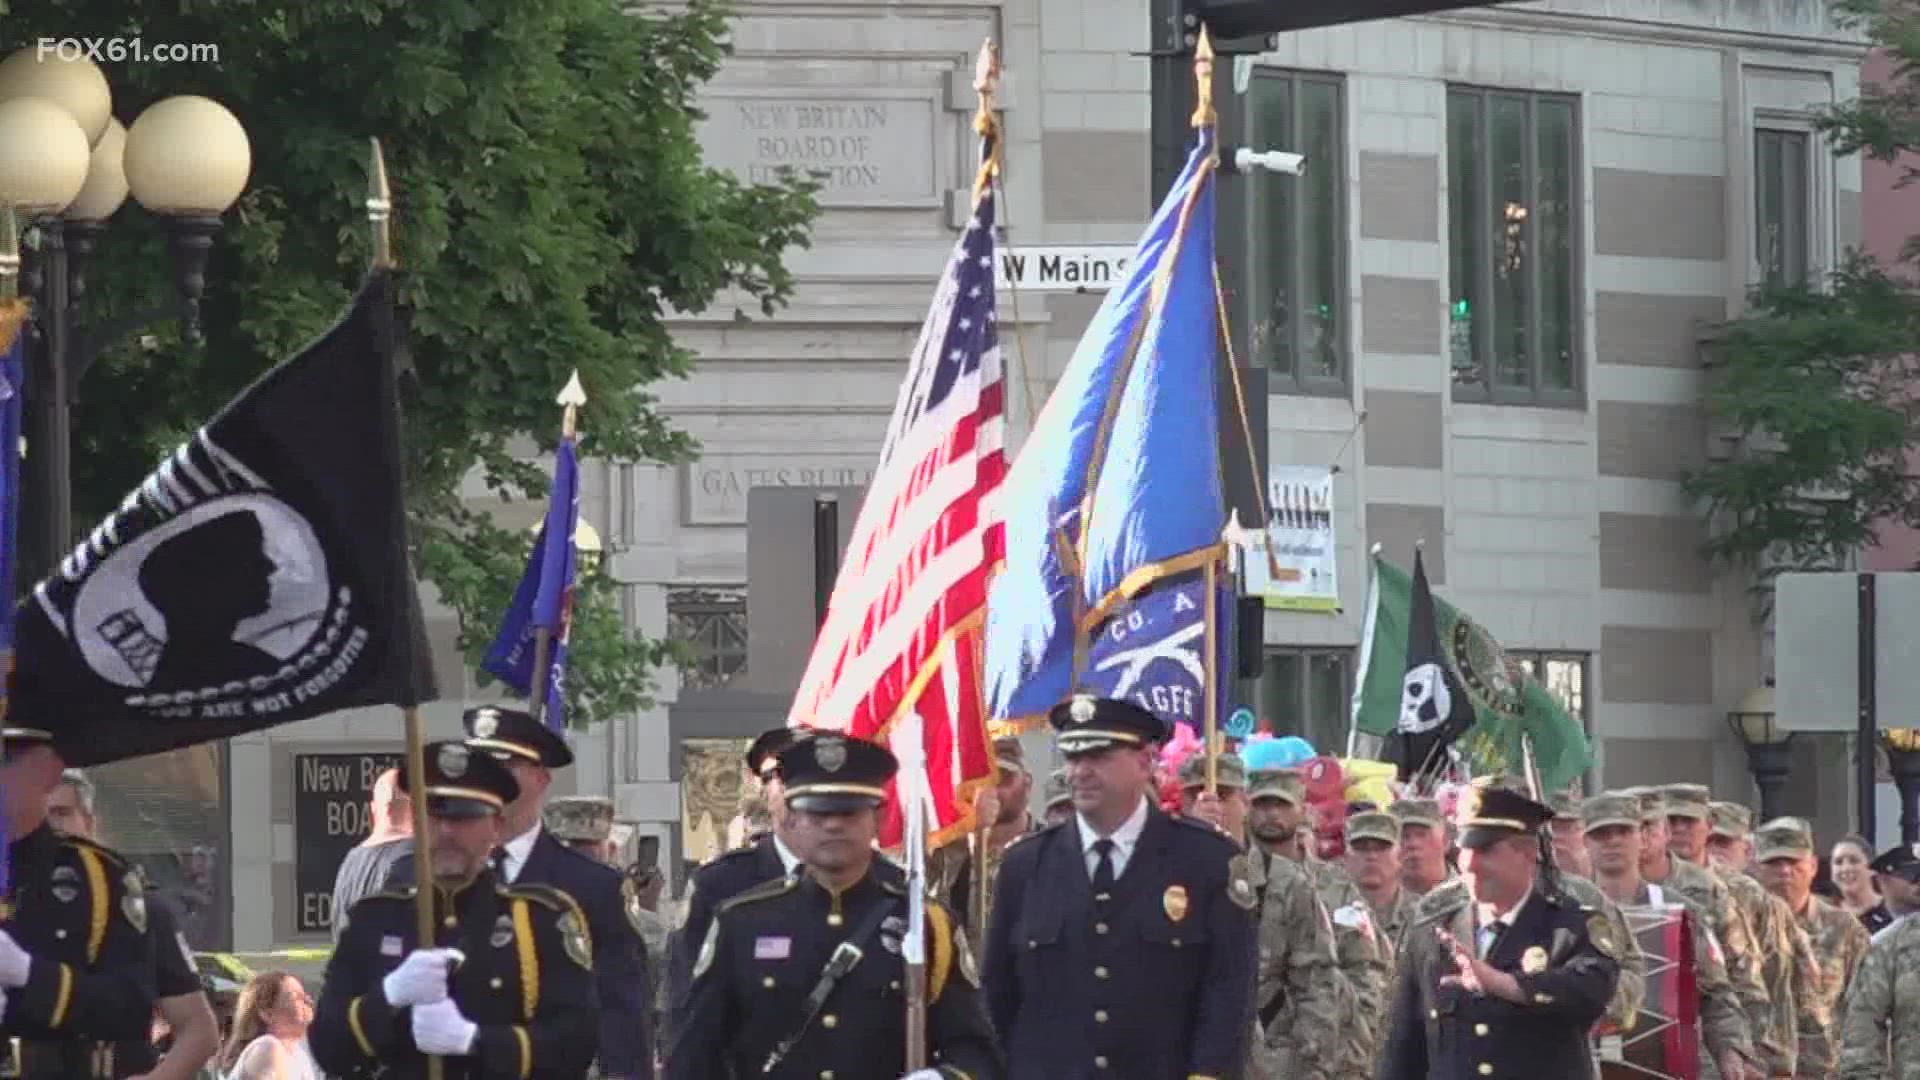 Spectators and performers at New Britain's Memorial Day Parade say it's about honoring those who died for their freedom.